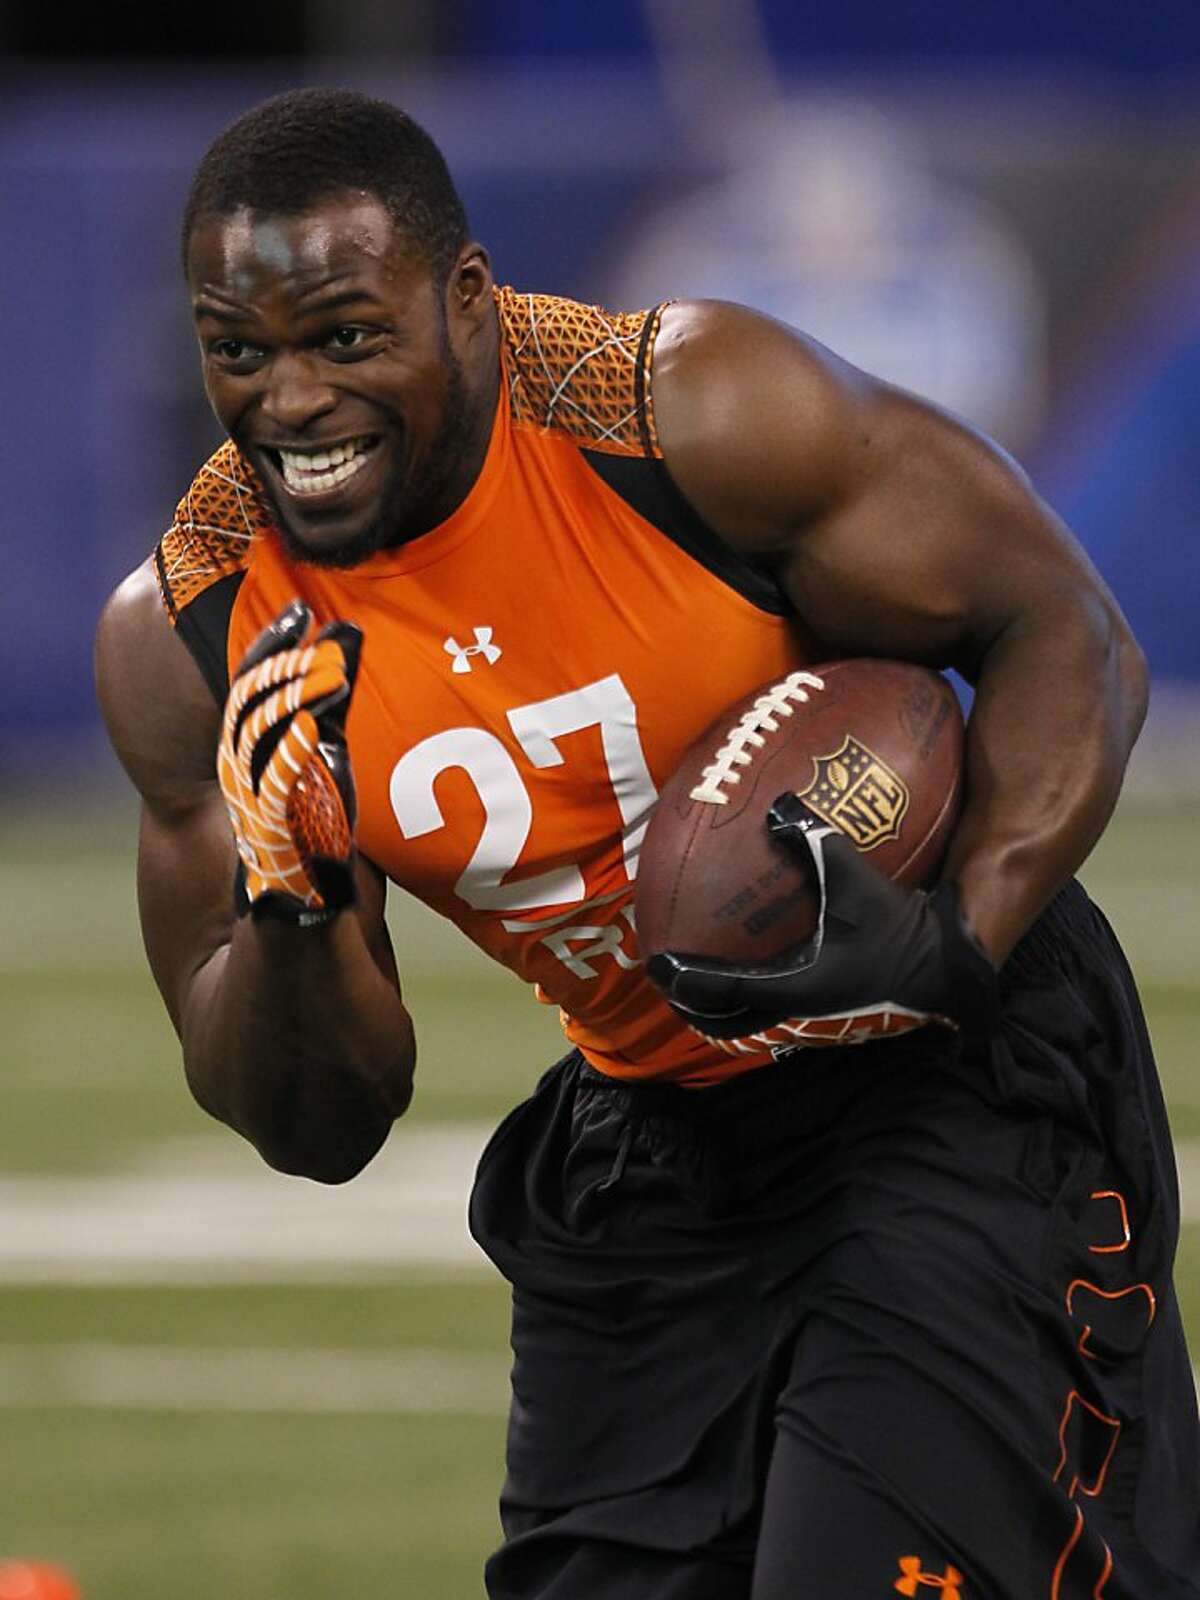 Utah State running back Robert Turbin runs a drill at the NFL football scouting combine in Indianapolis on Sunday, Feb. 26, 2012. (AP Photo/Dave Martin)